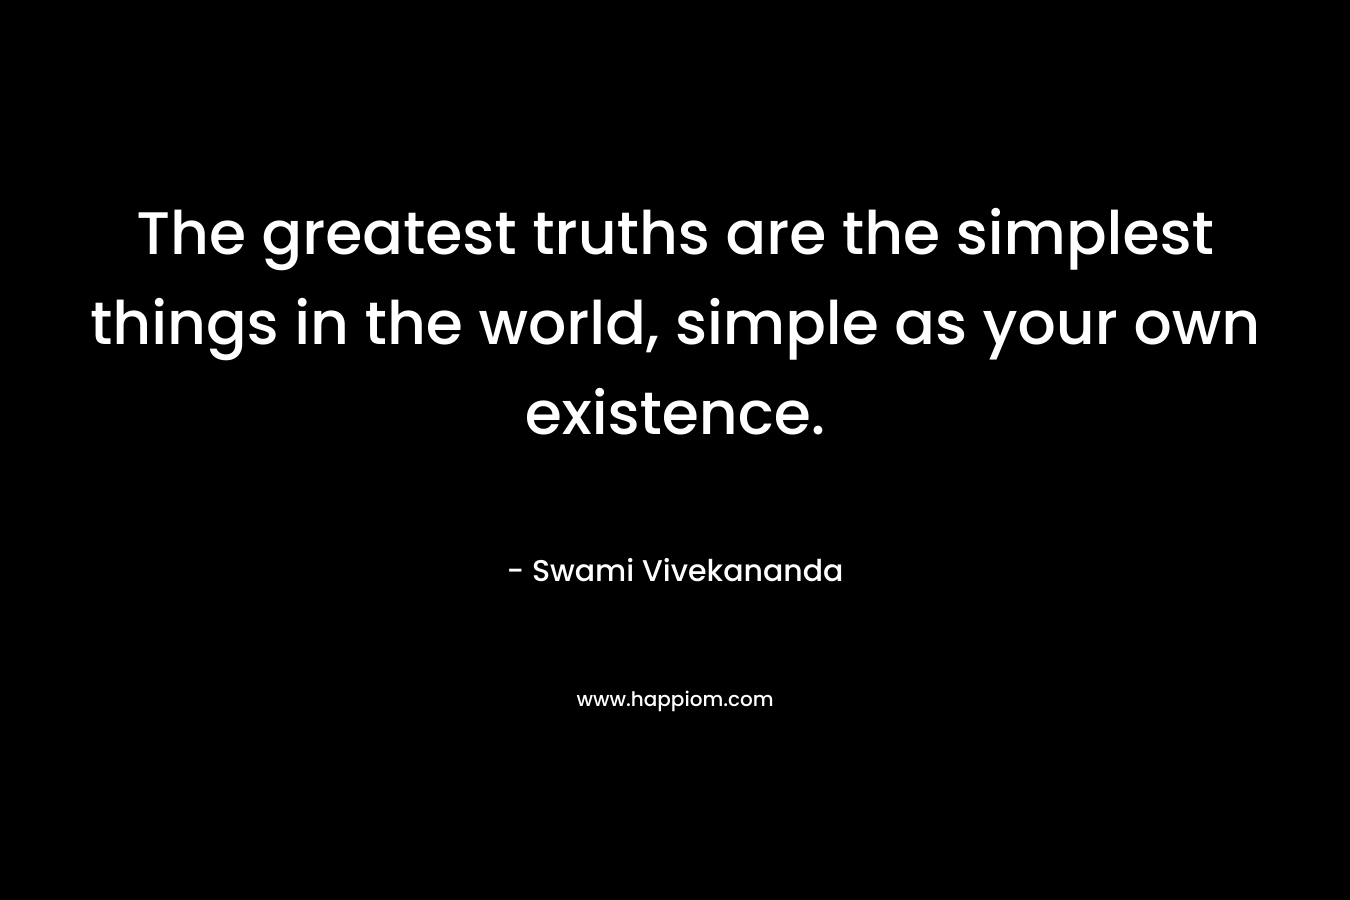 The greatest truths are the simplest things in the world, simple as your own existence.